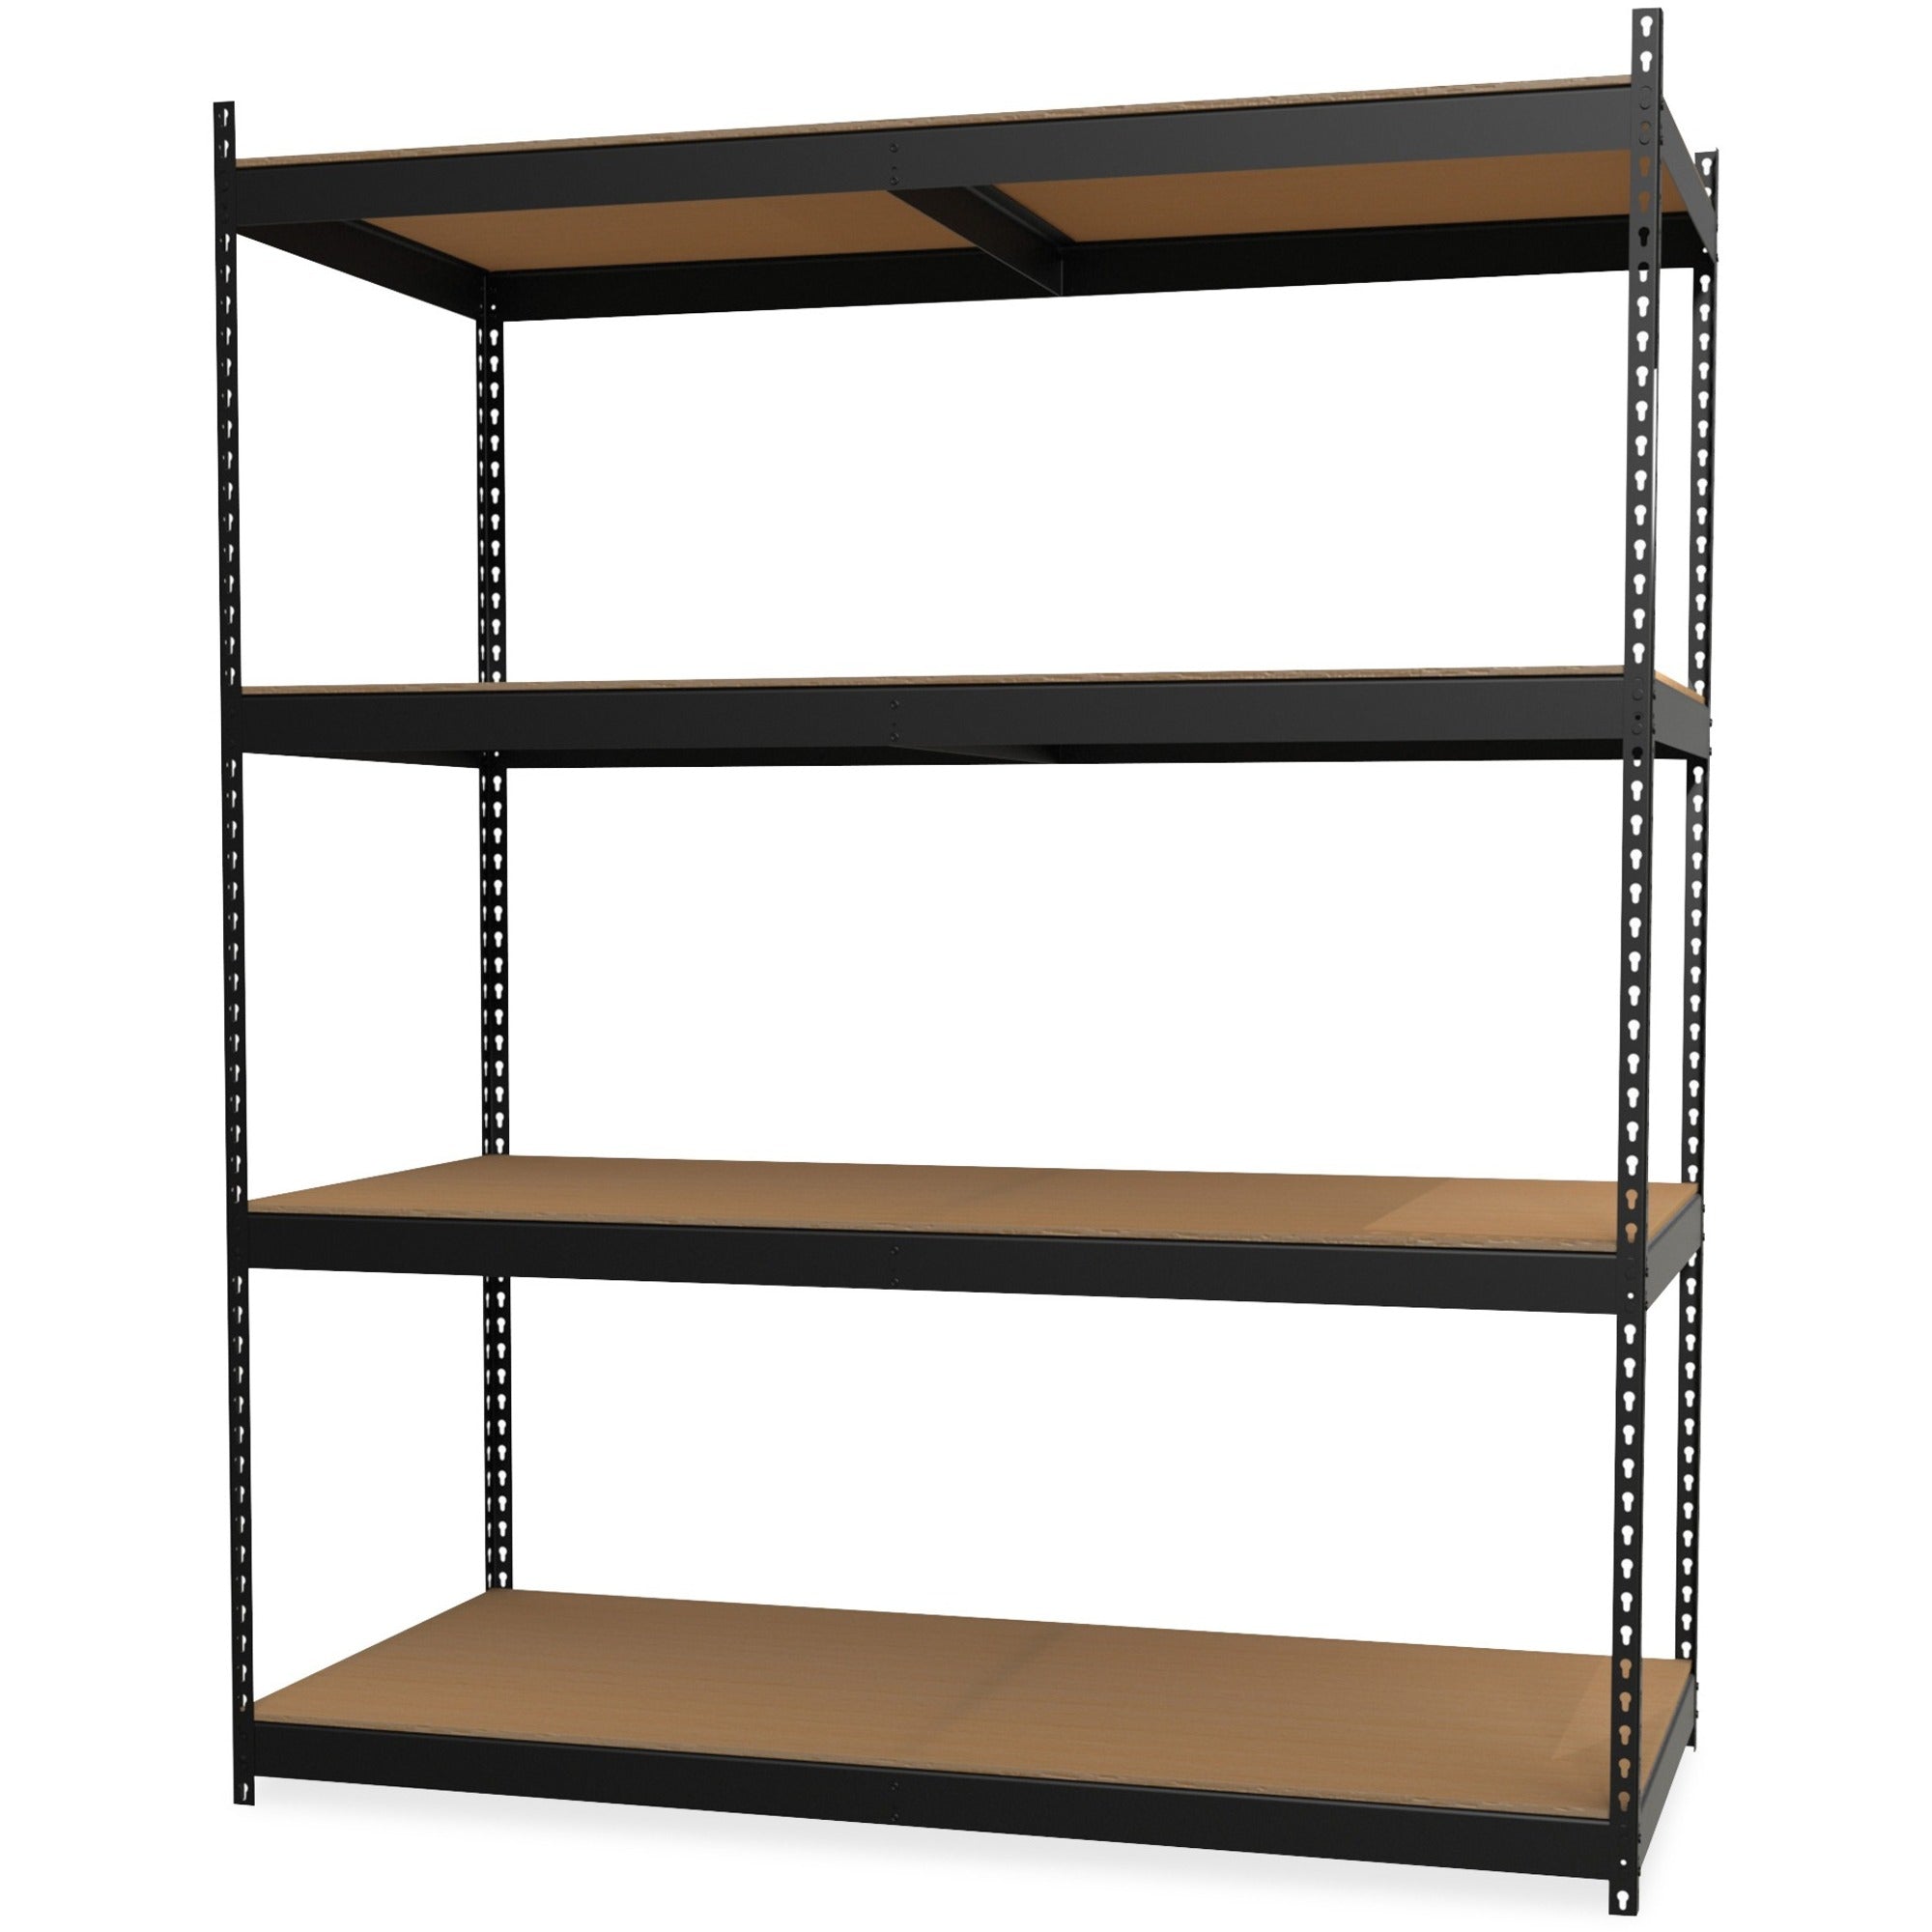 lorell-archival-shelving-80-x-box-4-compartments-84-height-x-69-width-x-33-depth-28%-recycled-black-steel-particleboard-1-each_llr99839 - 1